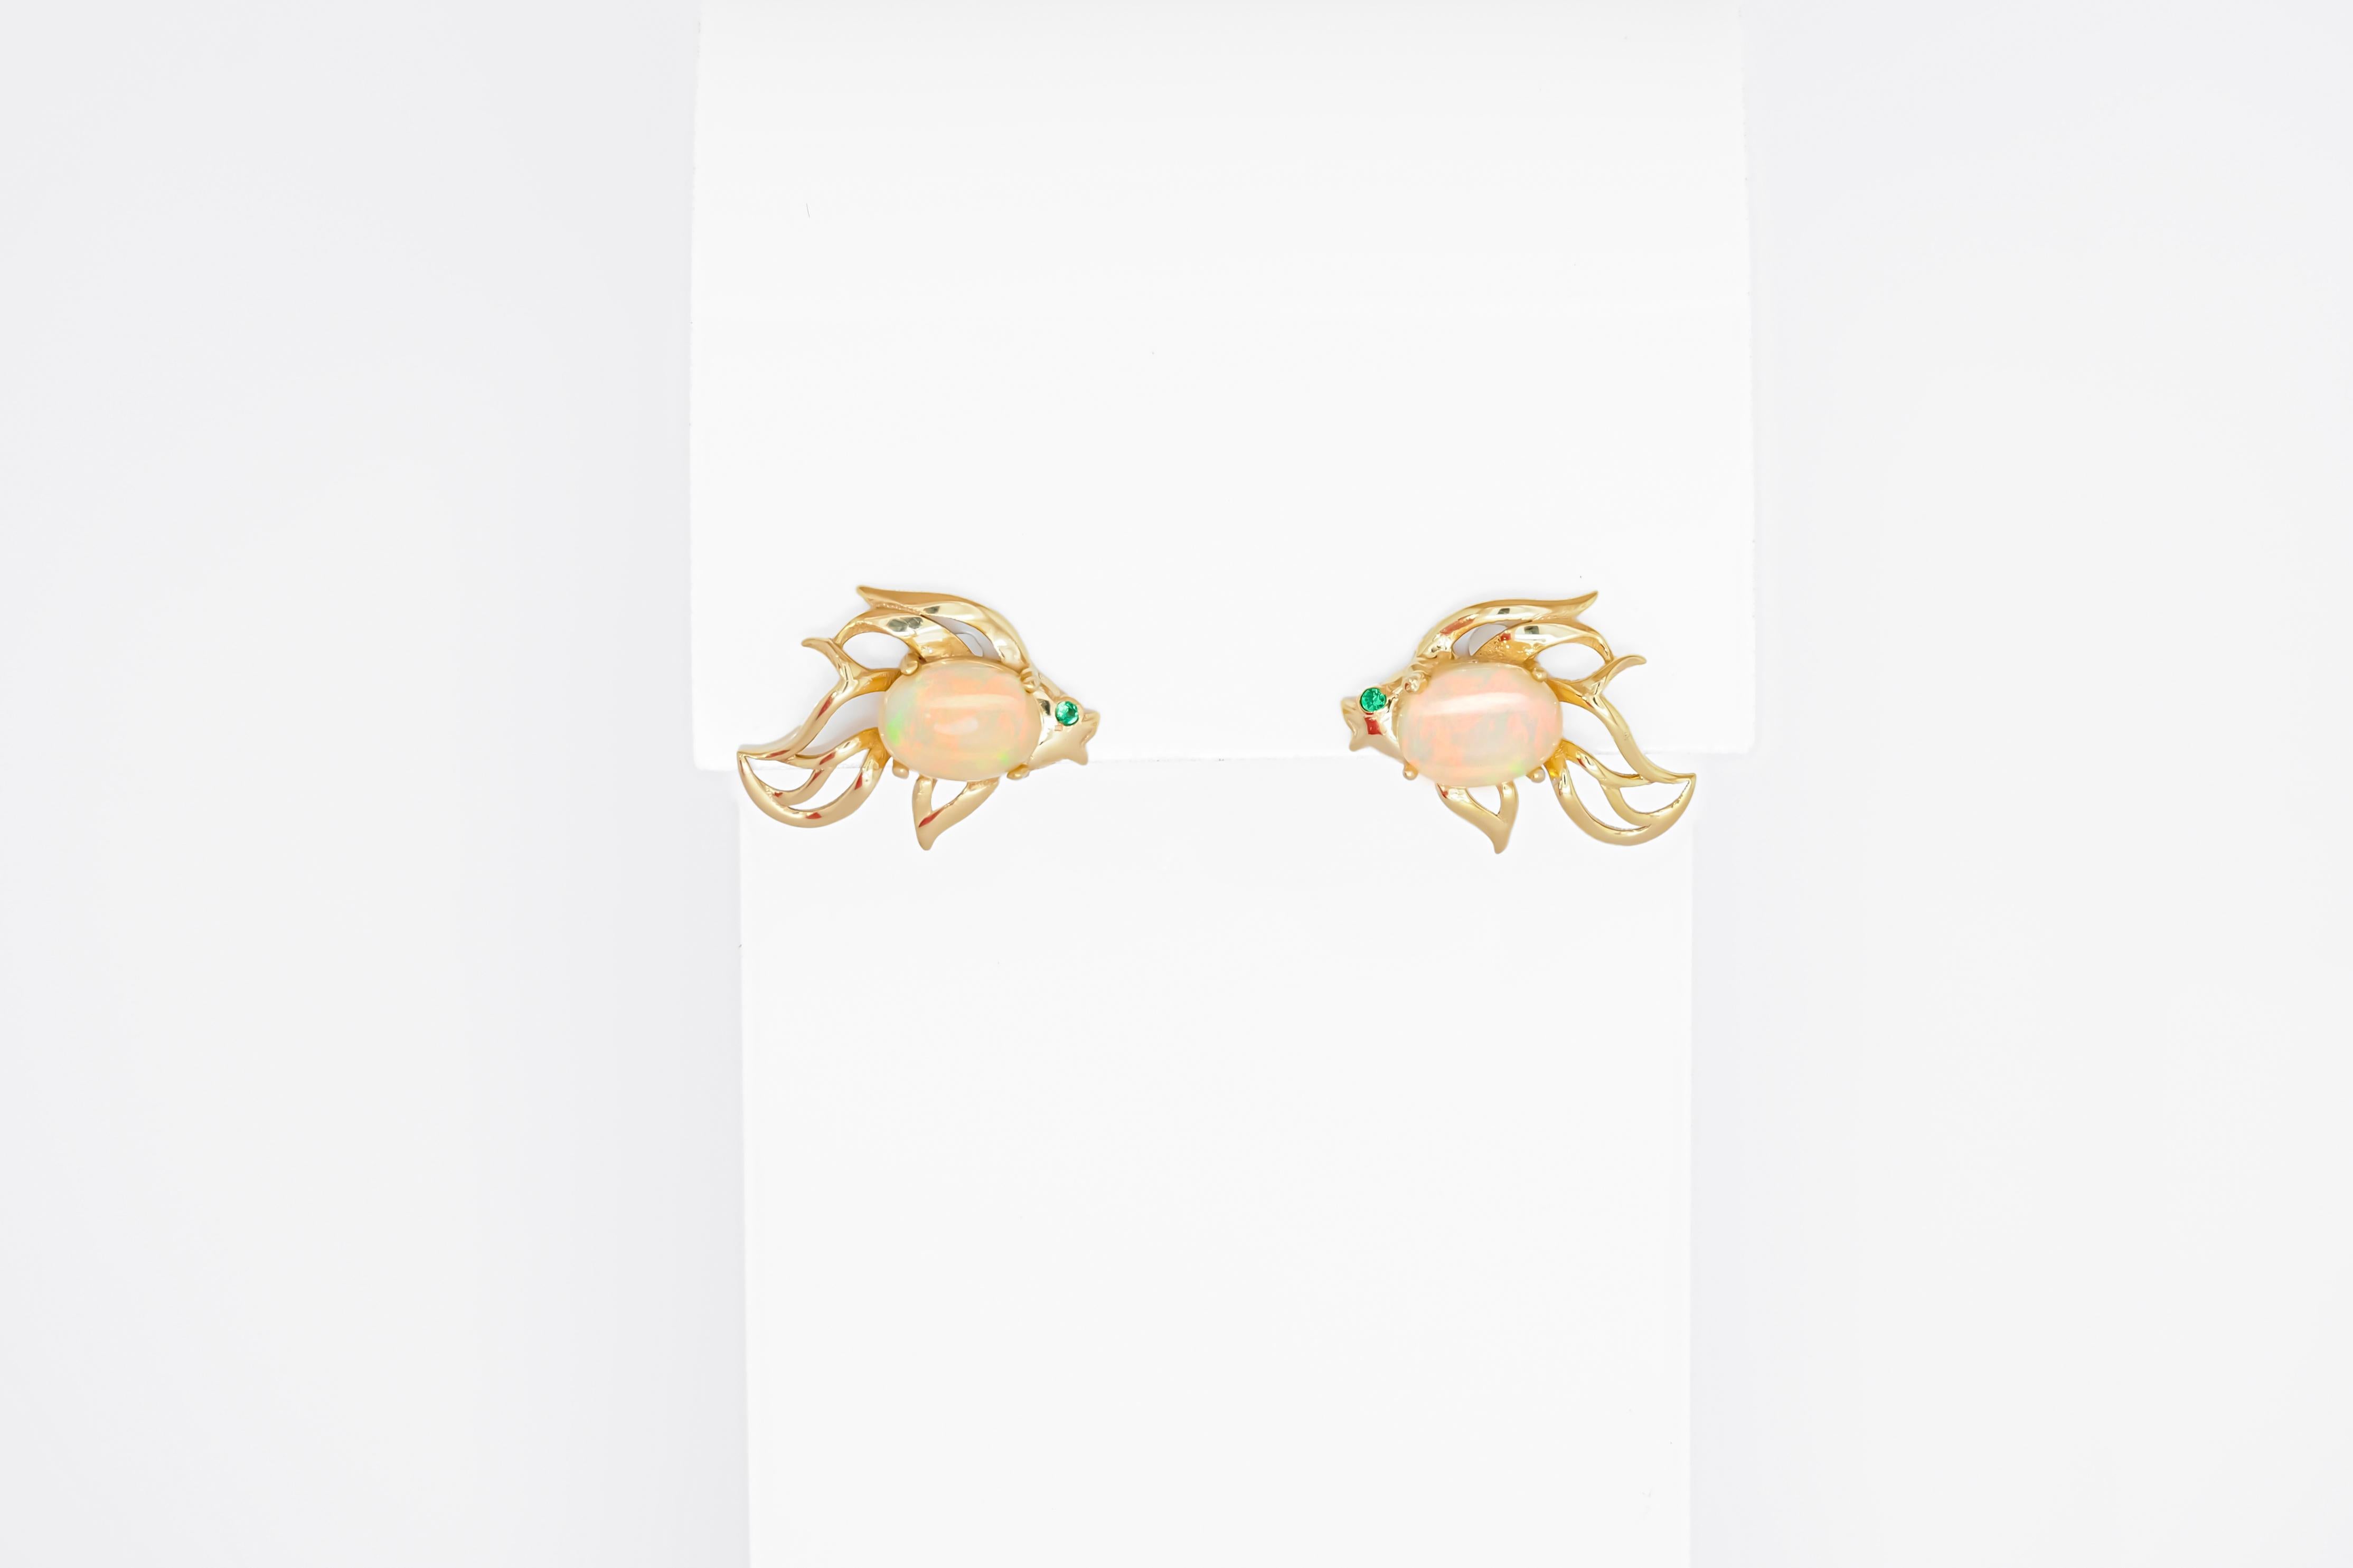 14k gold Fish earrings studs set in 14k gold. Opal earrings studs. Opal cabochon earrings. Animal Little Fish Jewelry. October Birthstone Opal Lucky fish Gift.

Earrings and pendant set:
Metal: 14k gold
Size: 18x16mm and same for earrings
Total